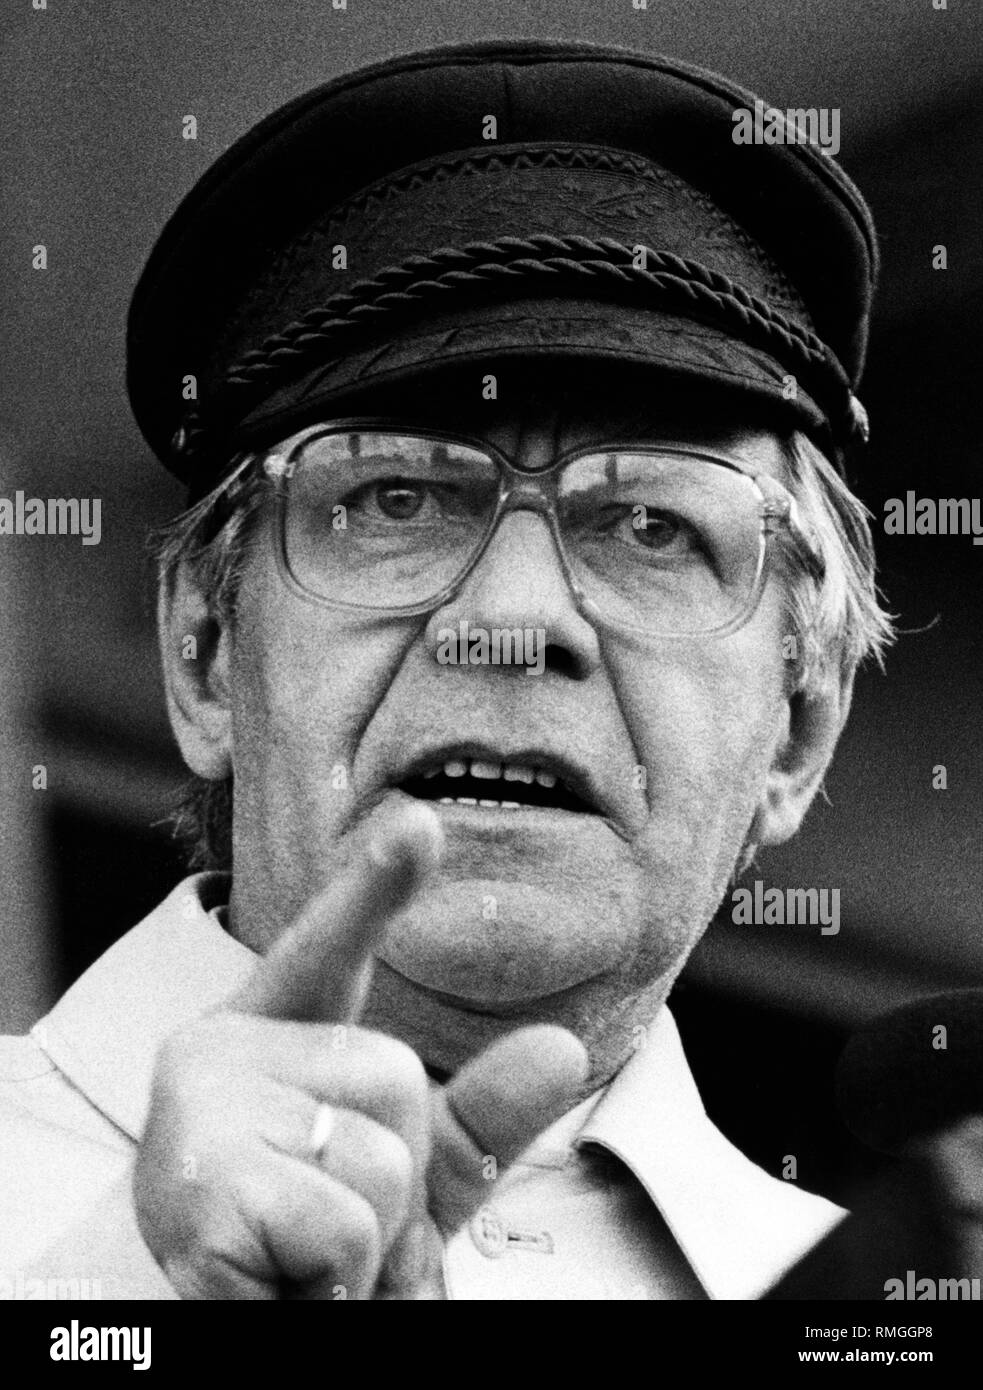 Chancellor Helmut Schmidt with Prinz Heinrich hat and glasses,  gesticulating Stock Photo - Alamy